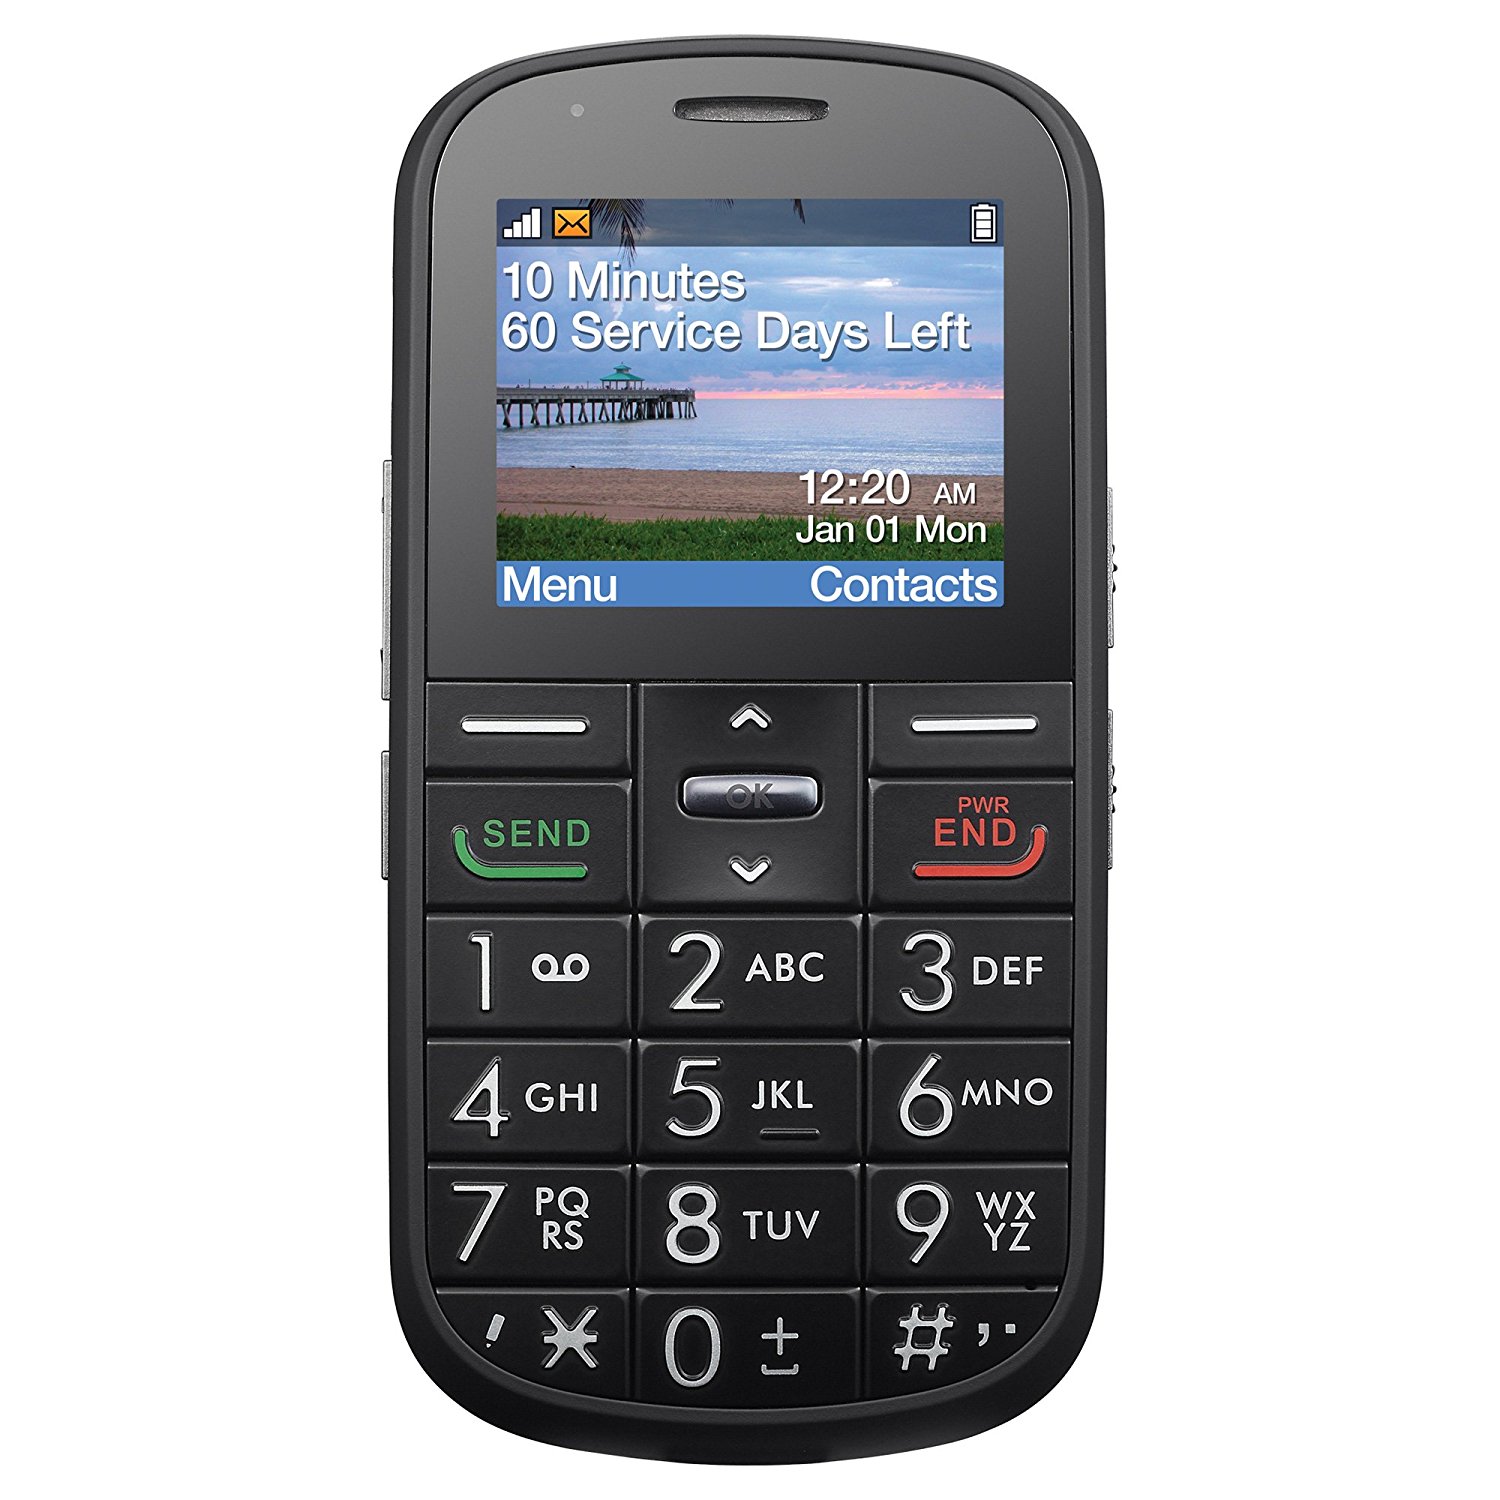 Alcatel 382g The Big Easy Prepaid Phone With Double Minutes Tracfone Big Nano Best Shopping Destination For Tech Lovers